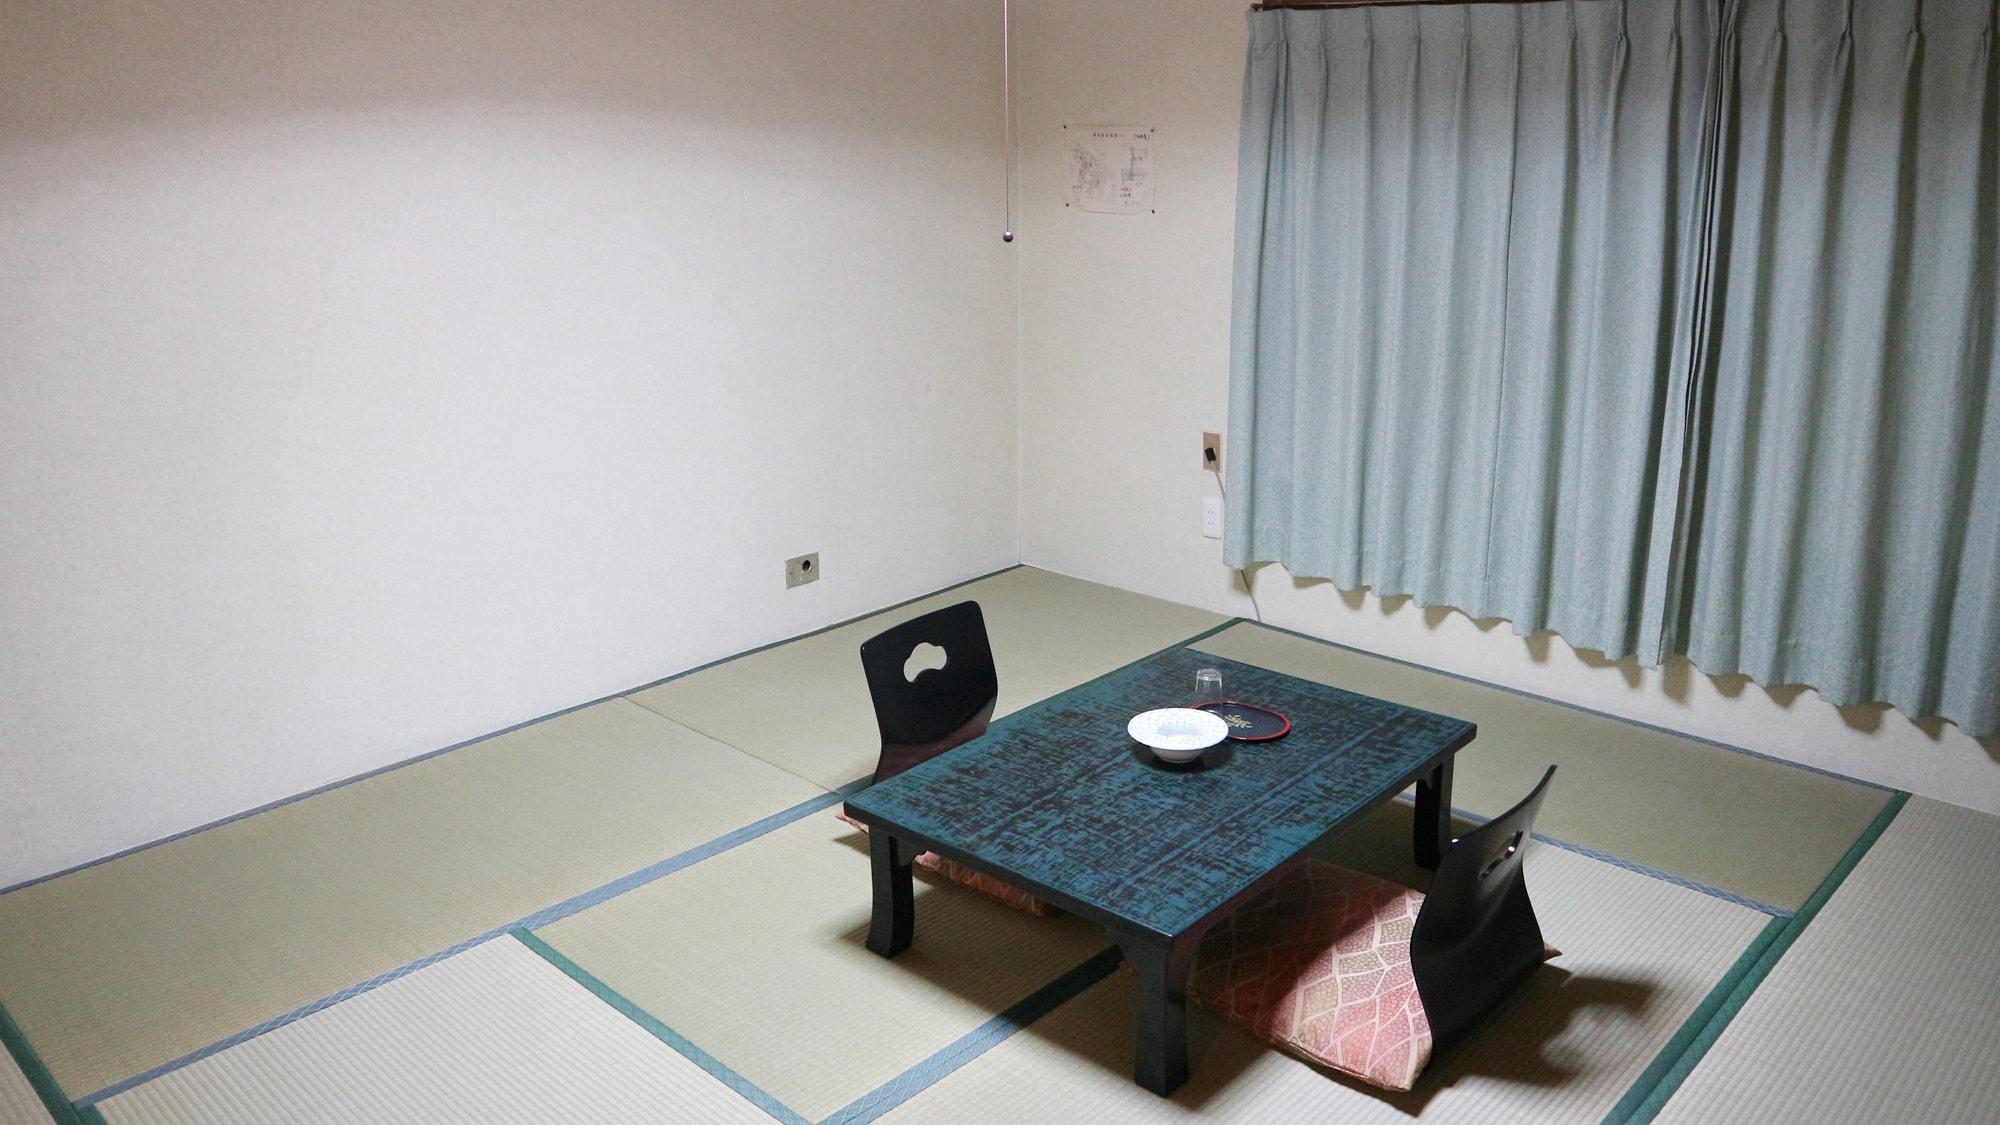 * Example of Japanese-style room / All Japanese-style rooms can be smoked. Please observe the manners and enjoy